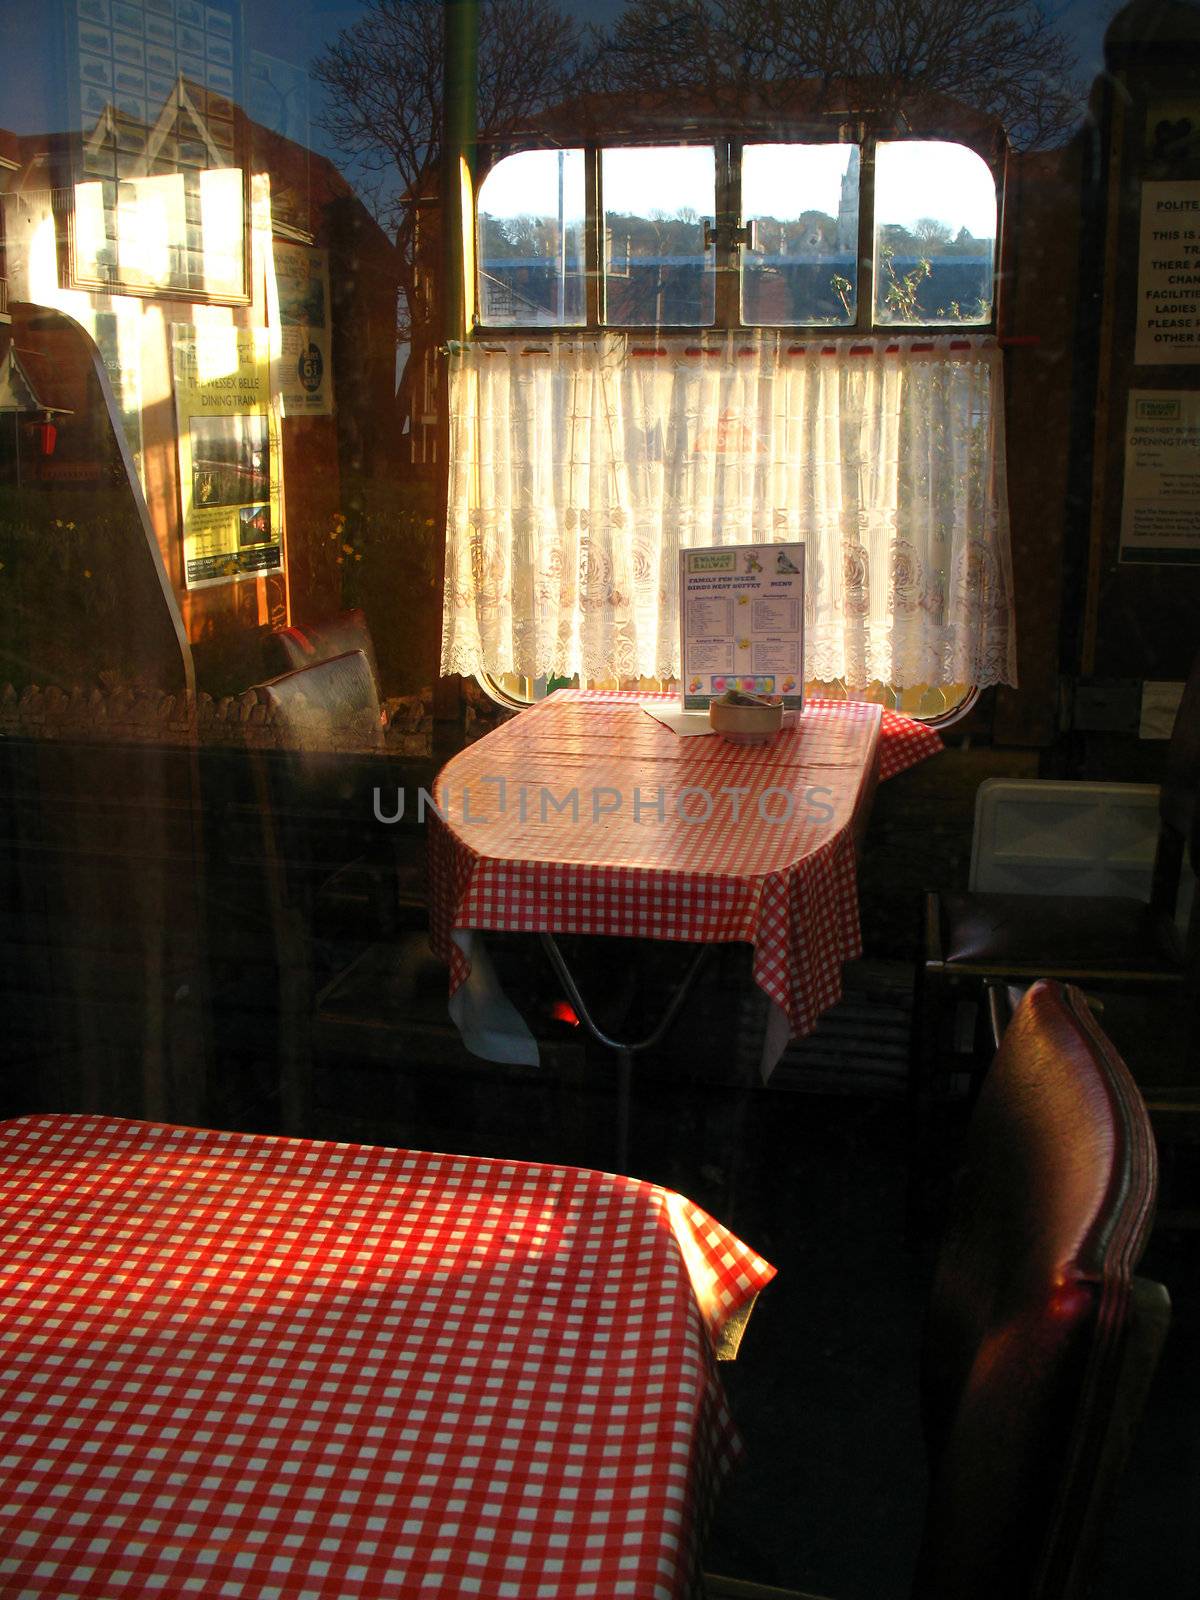 A view through the window of a Dining Carriage at the preserved Swanage Railway Station, in Dorset, Britain